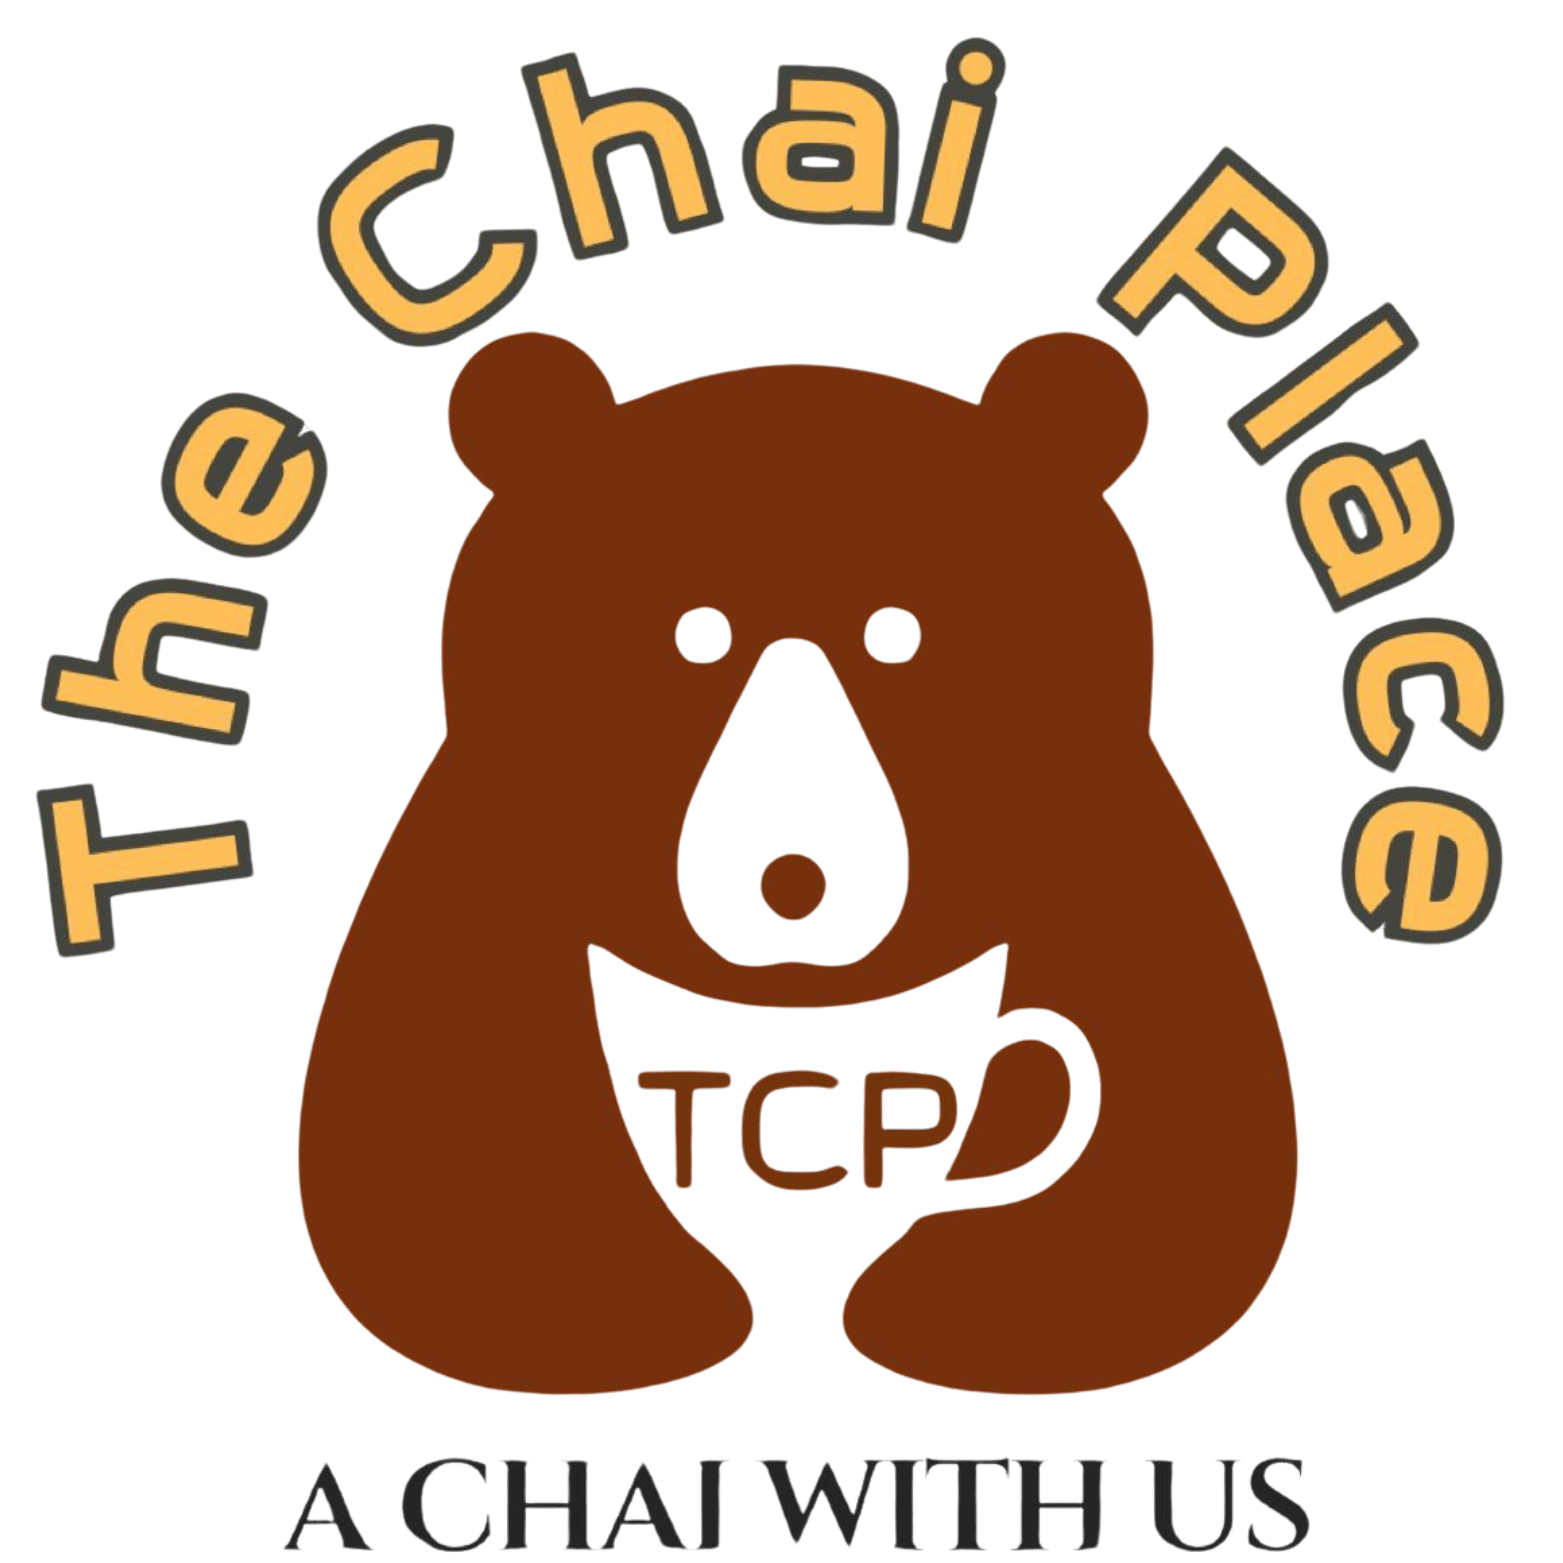 The Chai Place